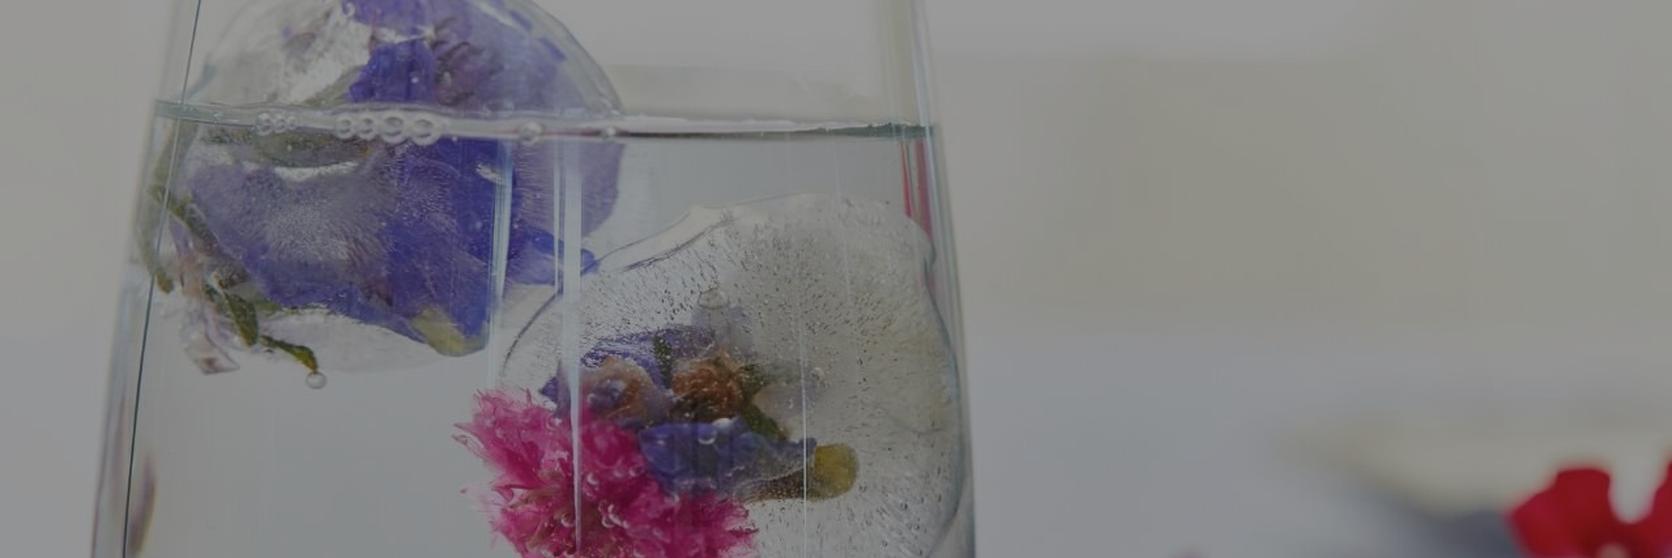 Floral-Ice-cubes-1